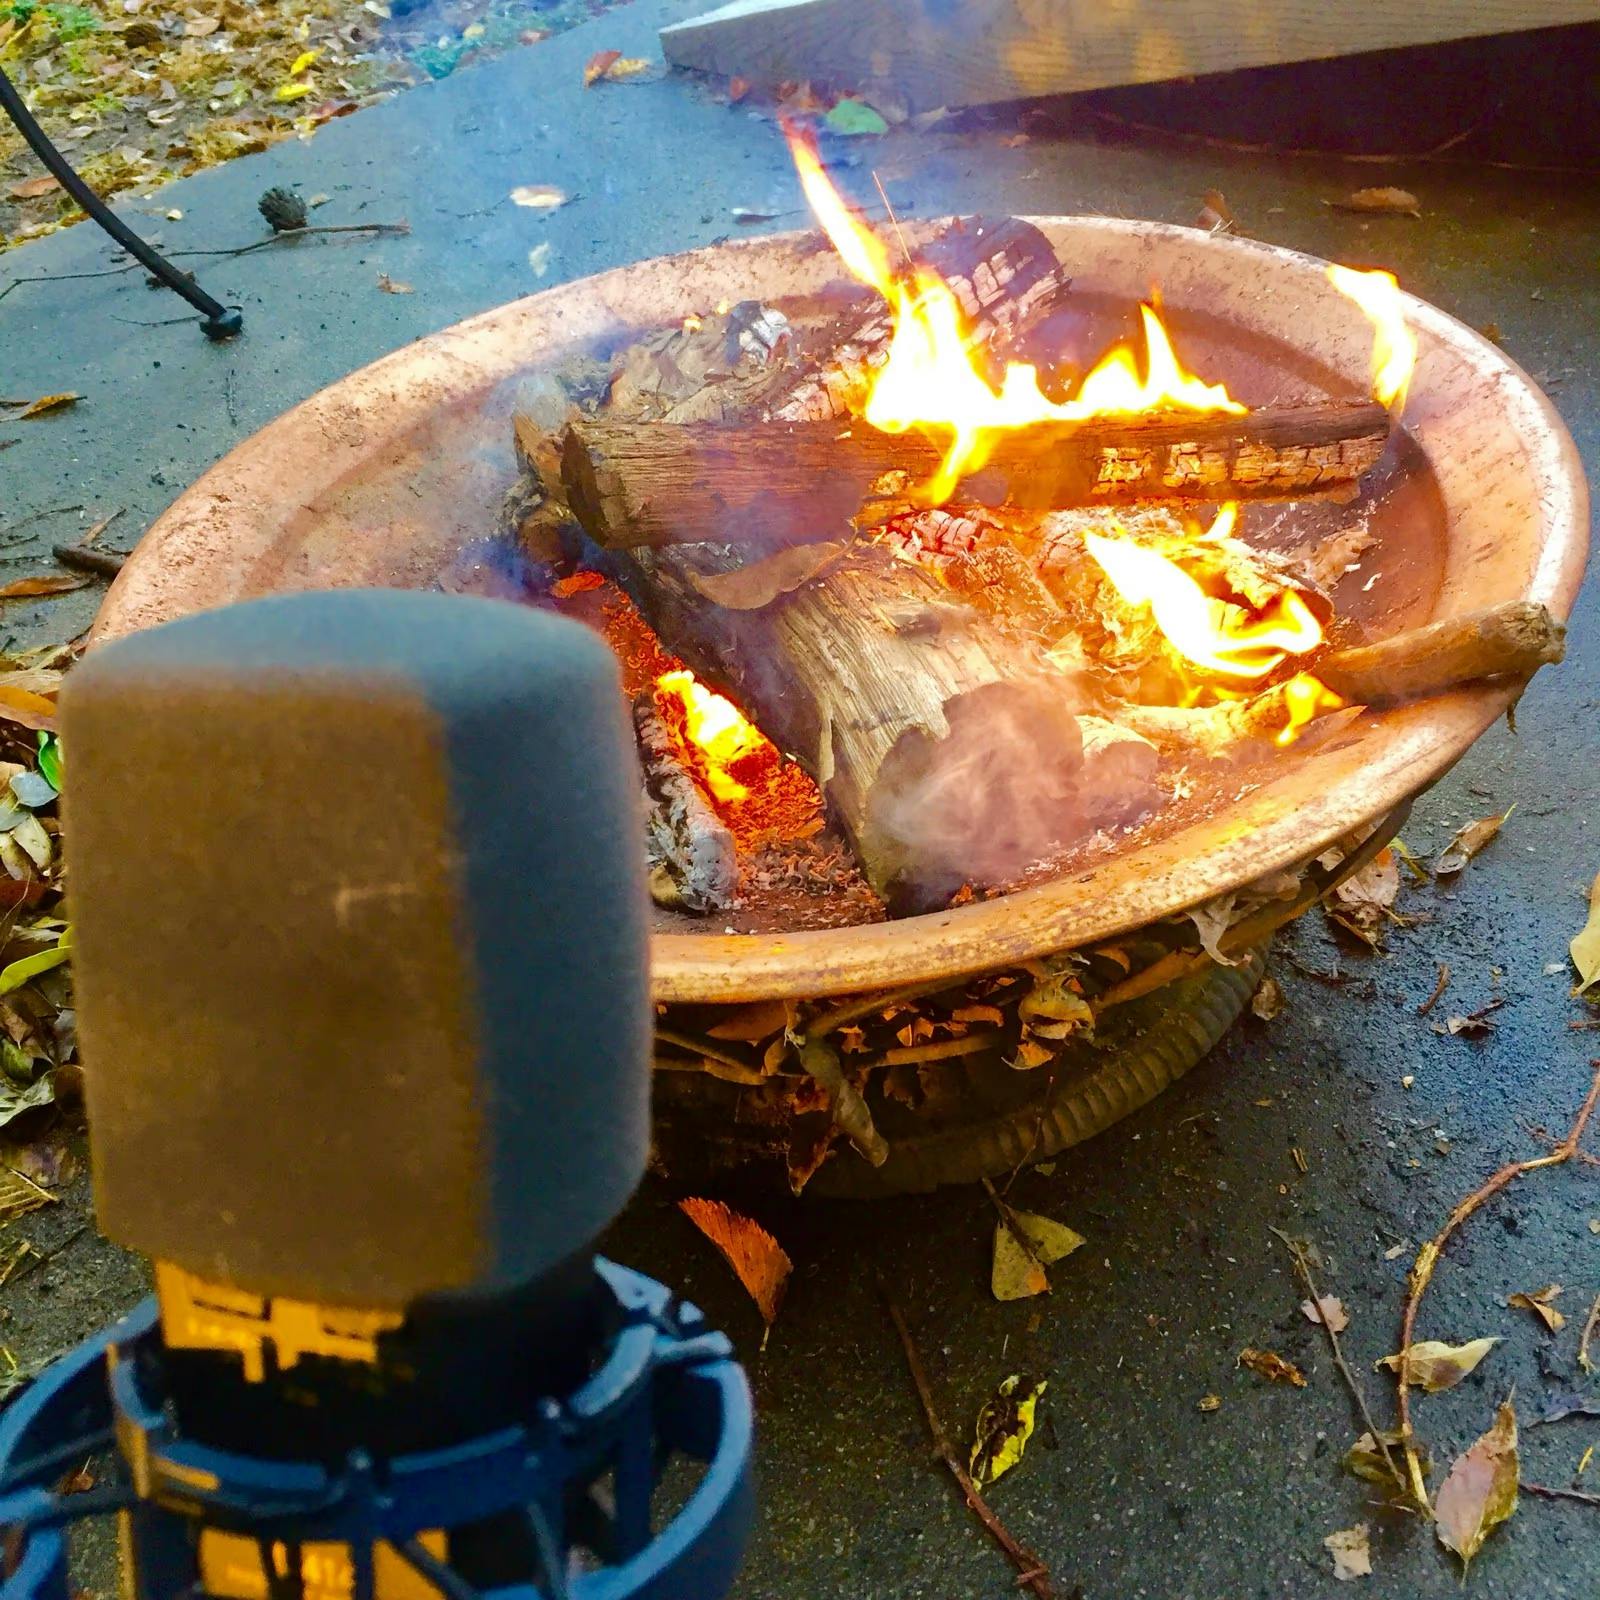 A photo of a fire pit